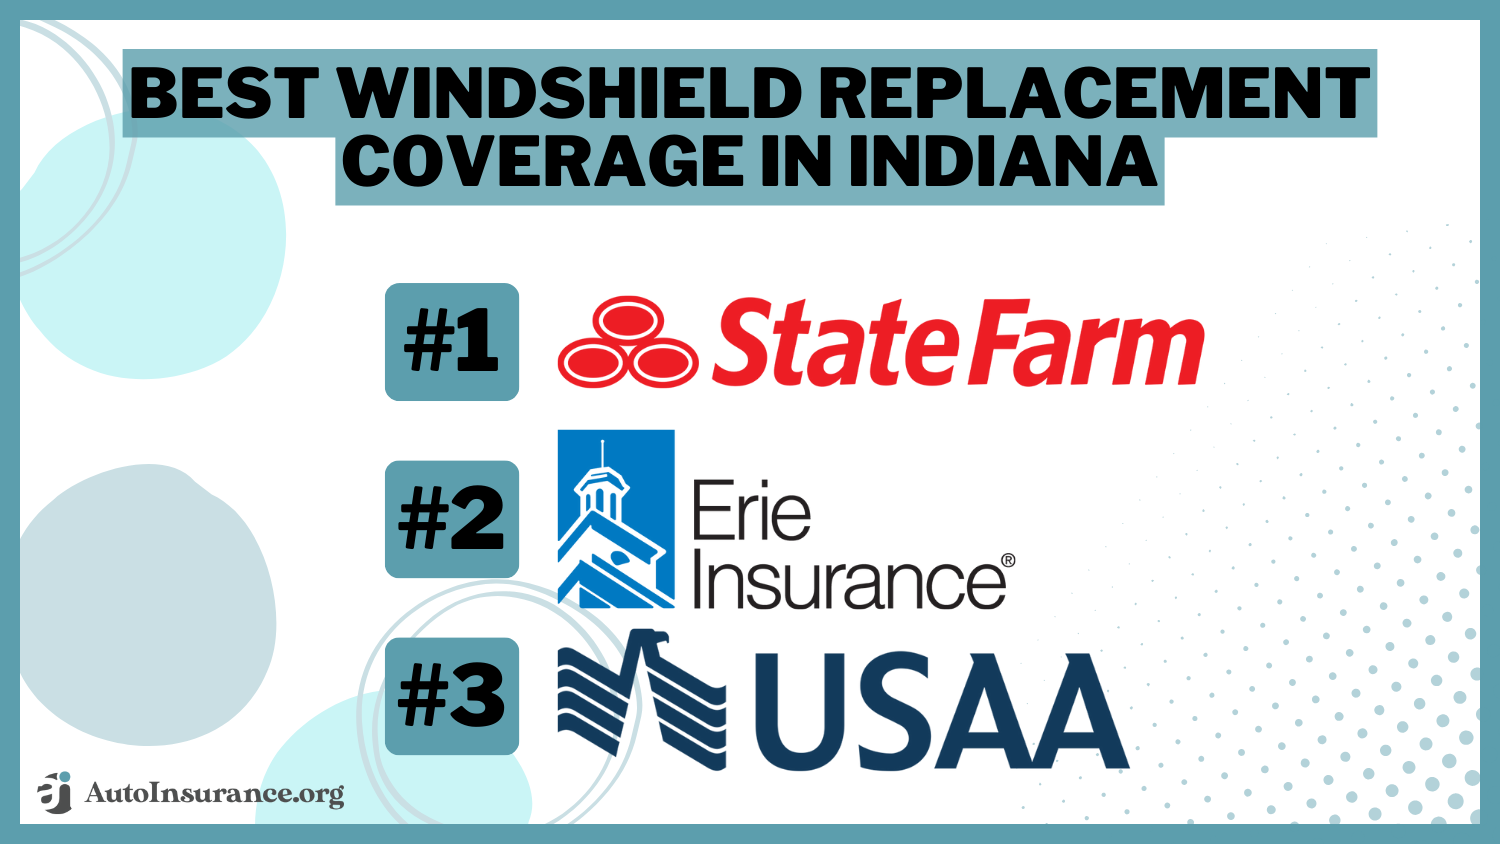 Best Windshield Replacement Coverage in Indiana: State Farm, Erie, and USAA